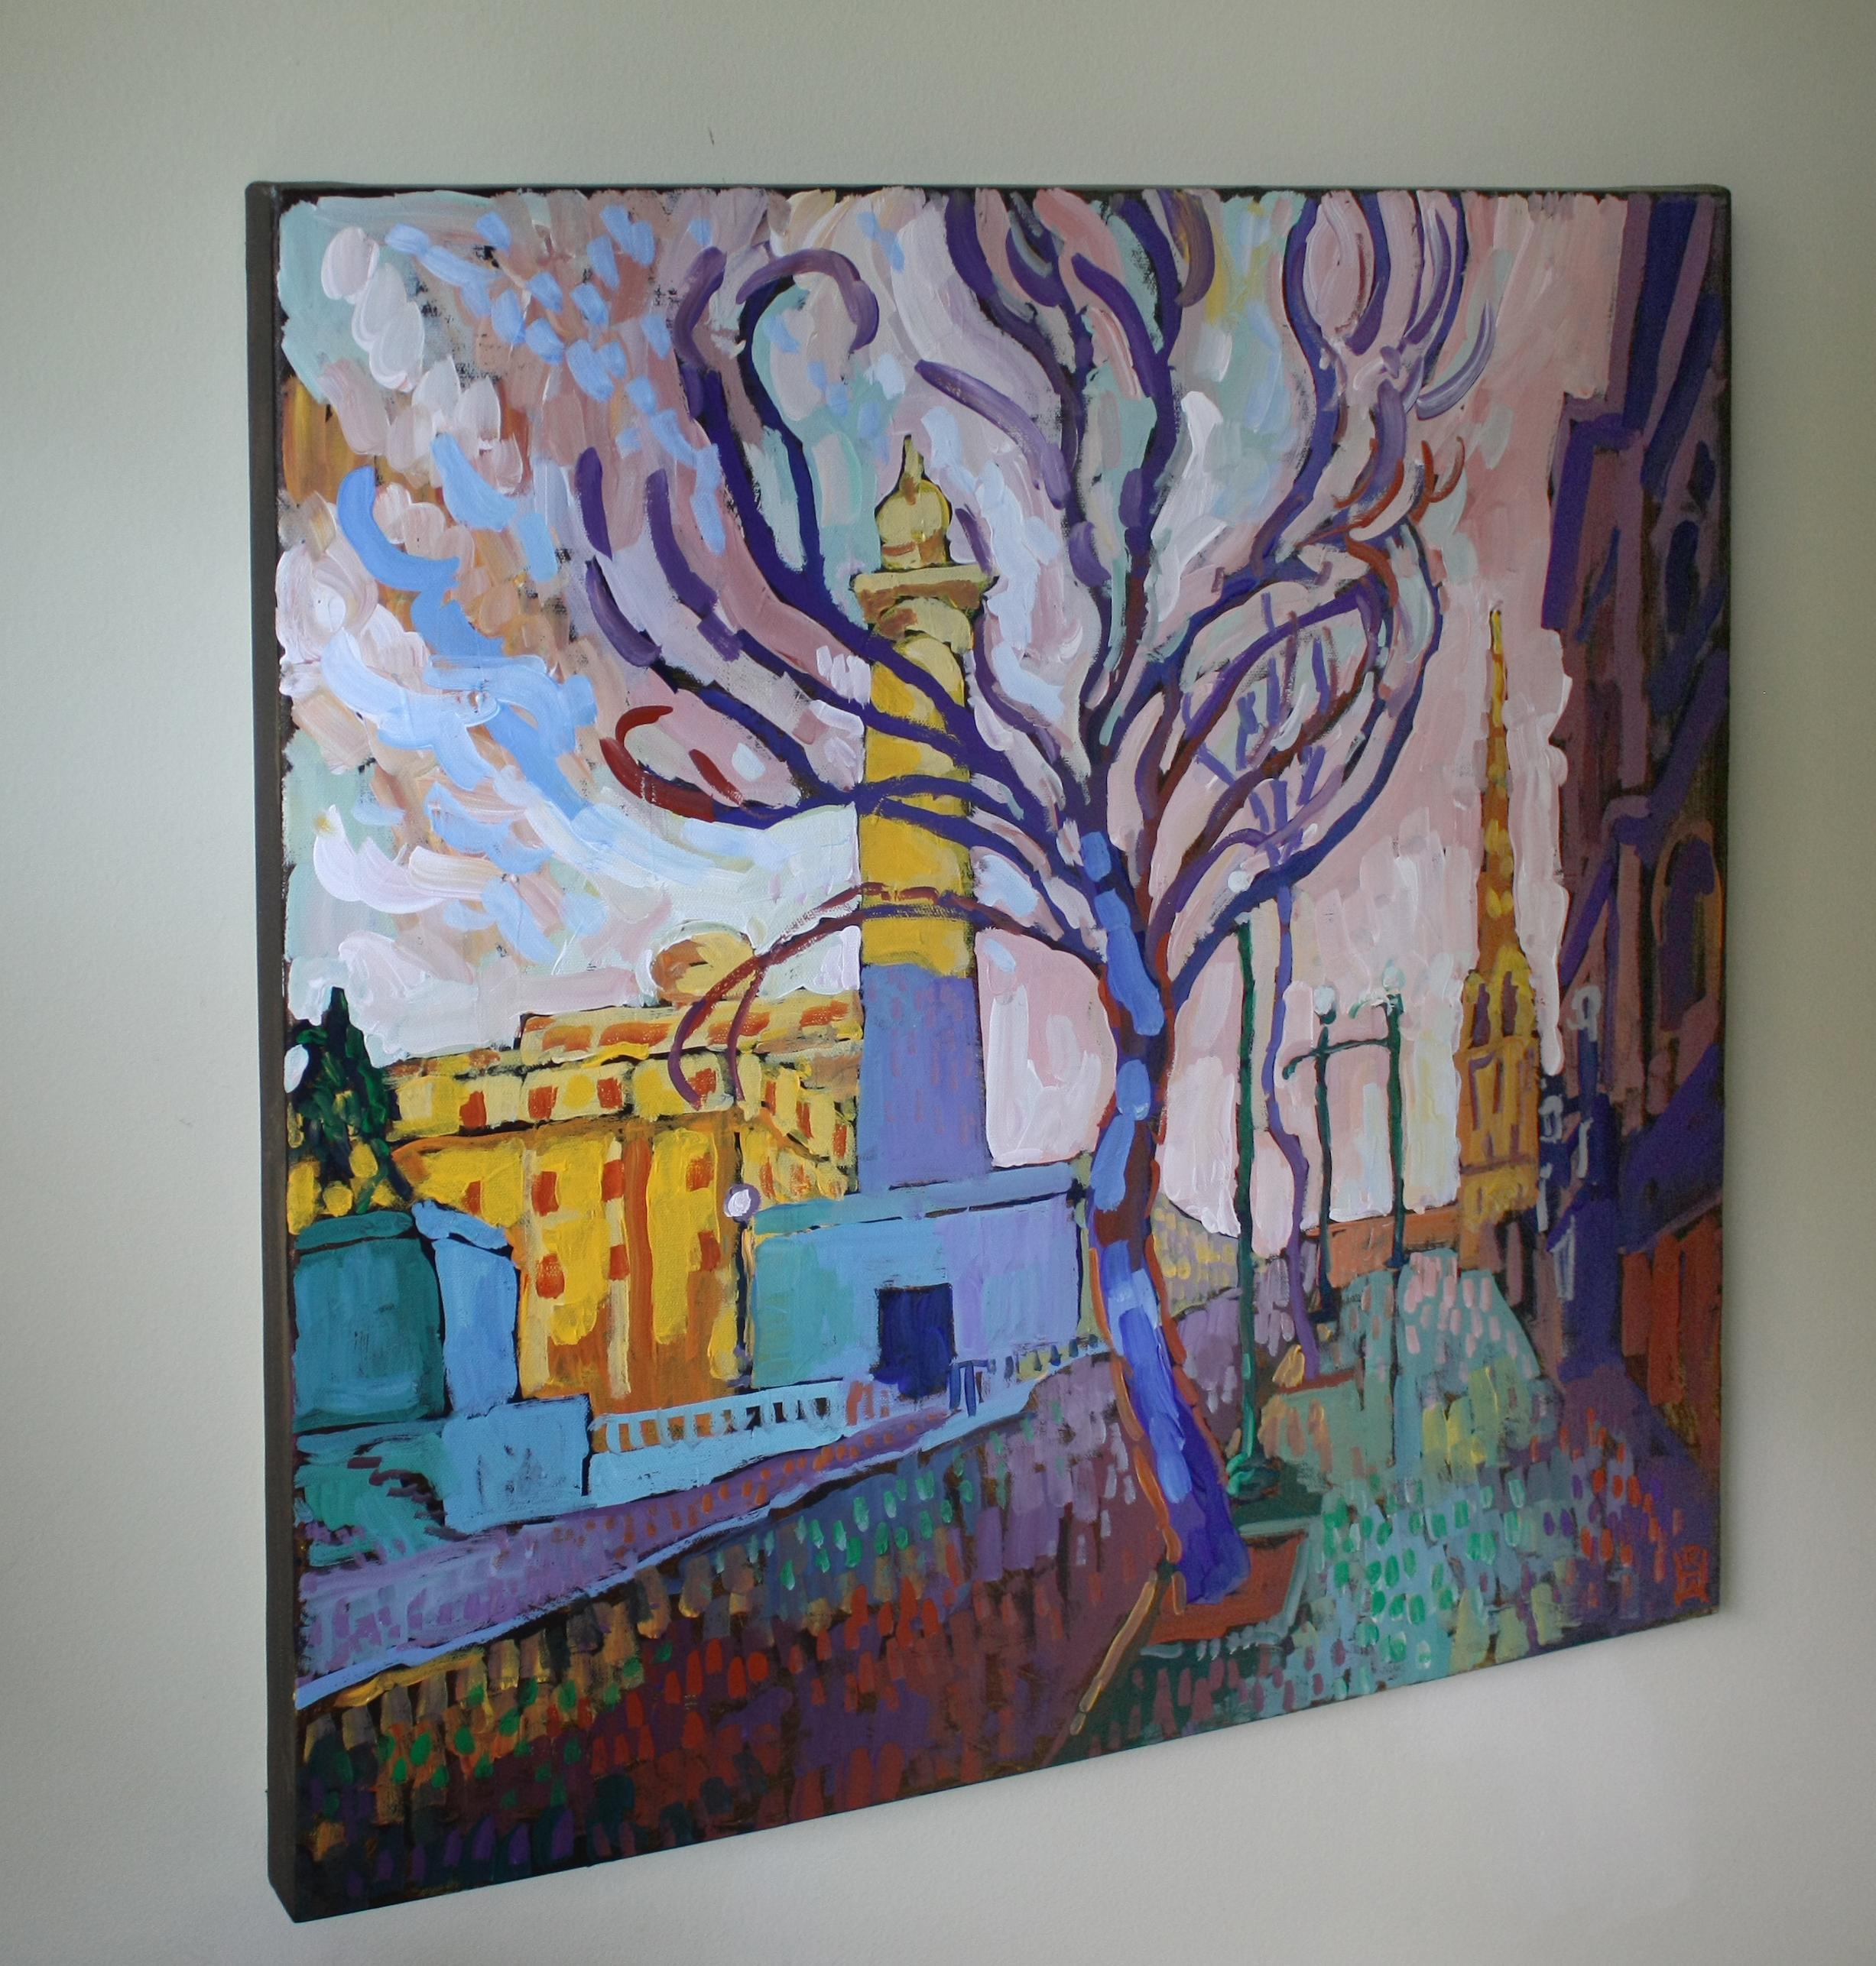 <p>Artist Comments<br>This work is a colorful, expressive treatment of part of the Mount Vernon neighborhood of Baltimore. A monument to George Washington, as well as an equestrian statue, are visible to the left of the large tree that dominates the